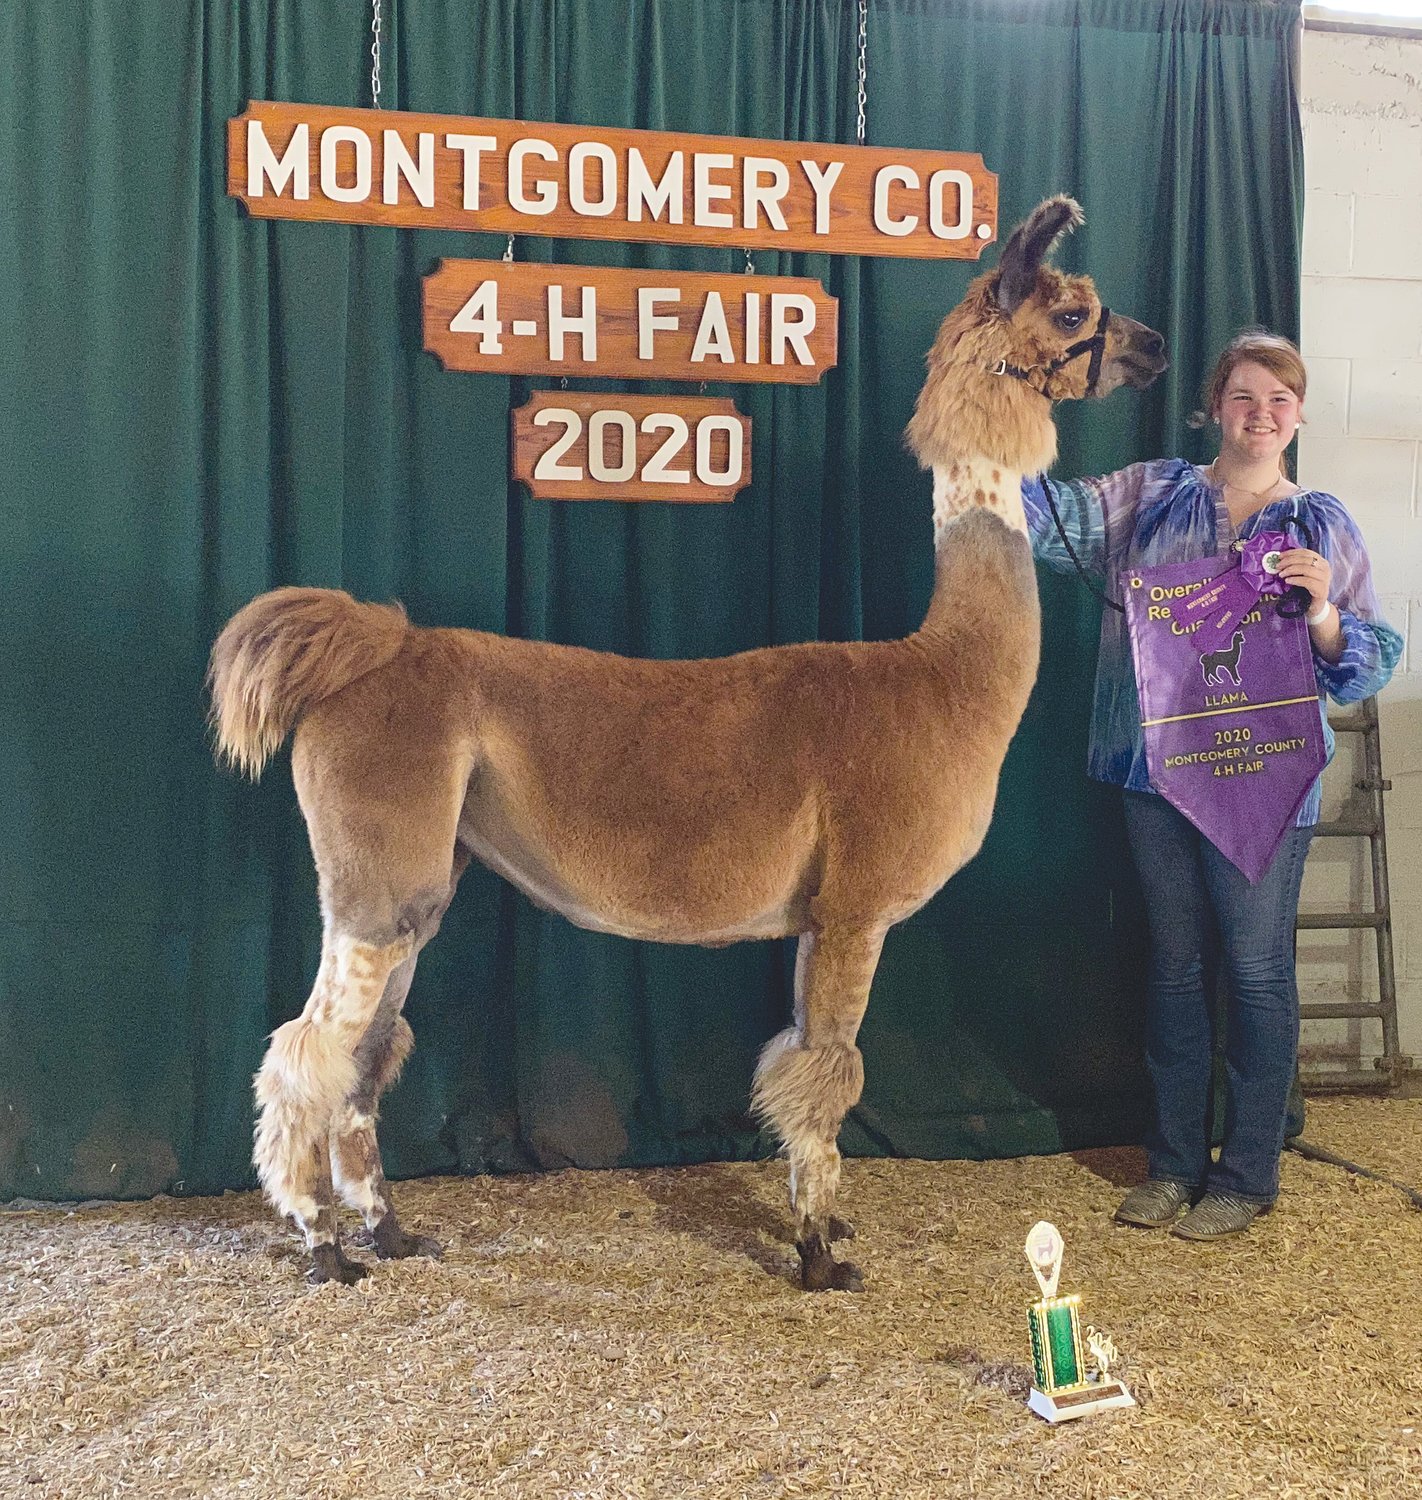 Megan Fruits, a 10-year 4-H member, pictured with Visitina, was named the overall grand champion showman and champion senior showman at the Montgomery County 4-H Llama Show. Fruits earned champion light wool and reserve grand champion halter animal as well as grand champion costume and champion senior performance.